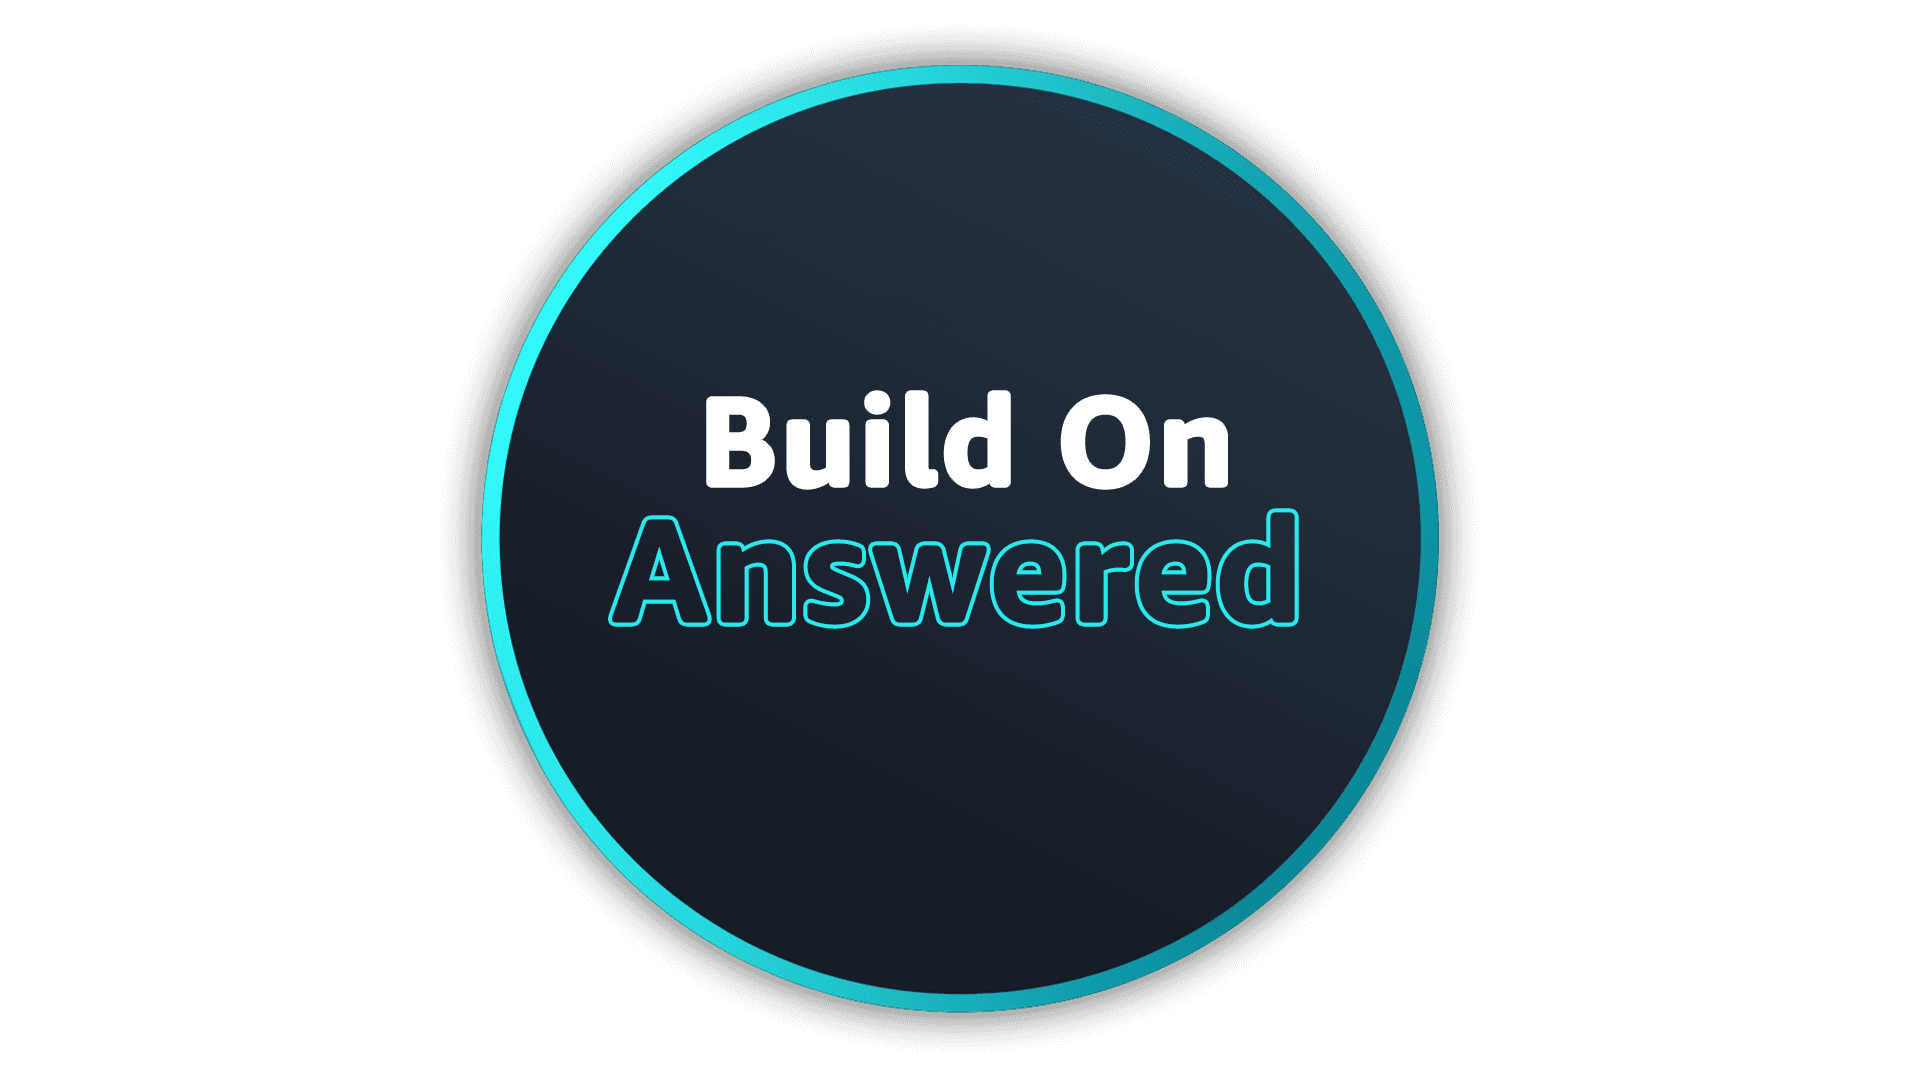 Build On Live: Answered